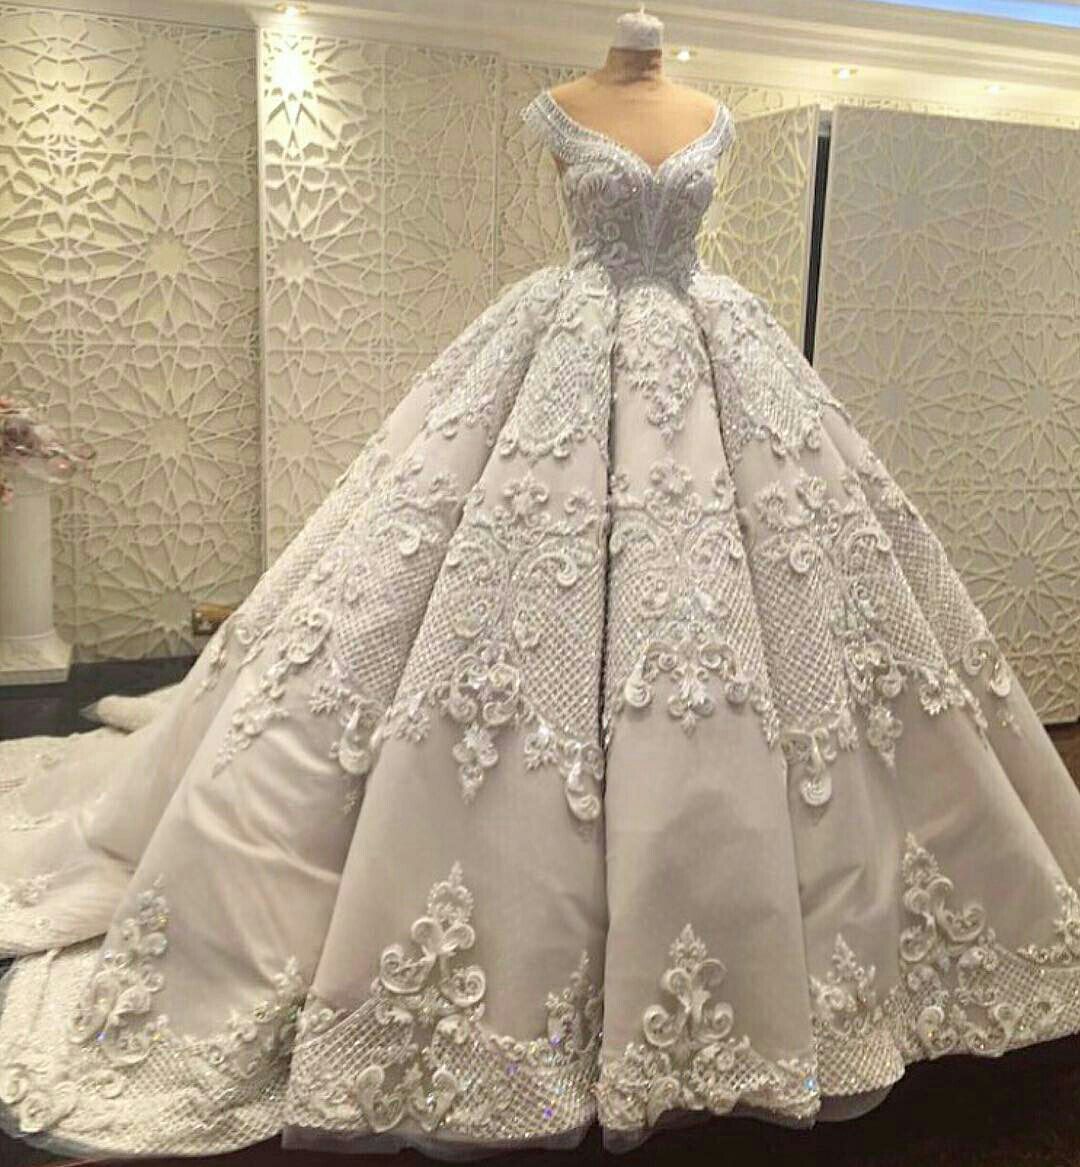 debut ball gown